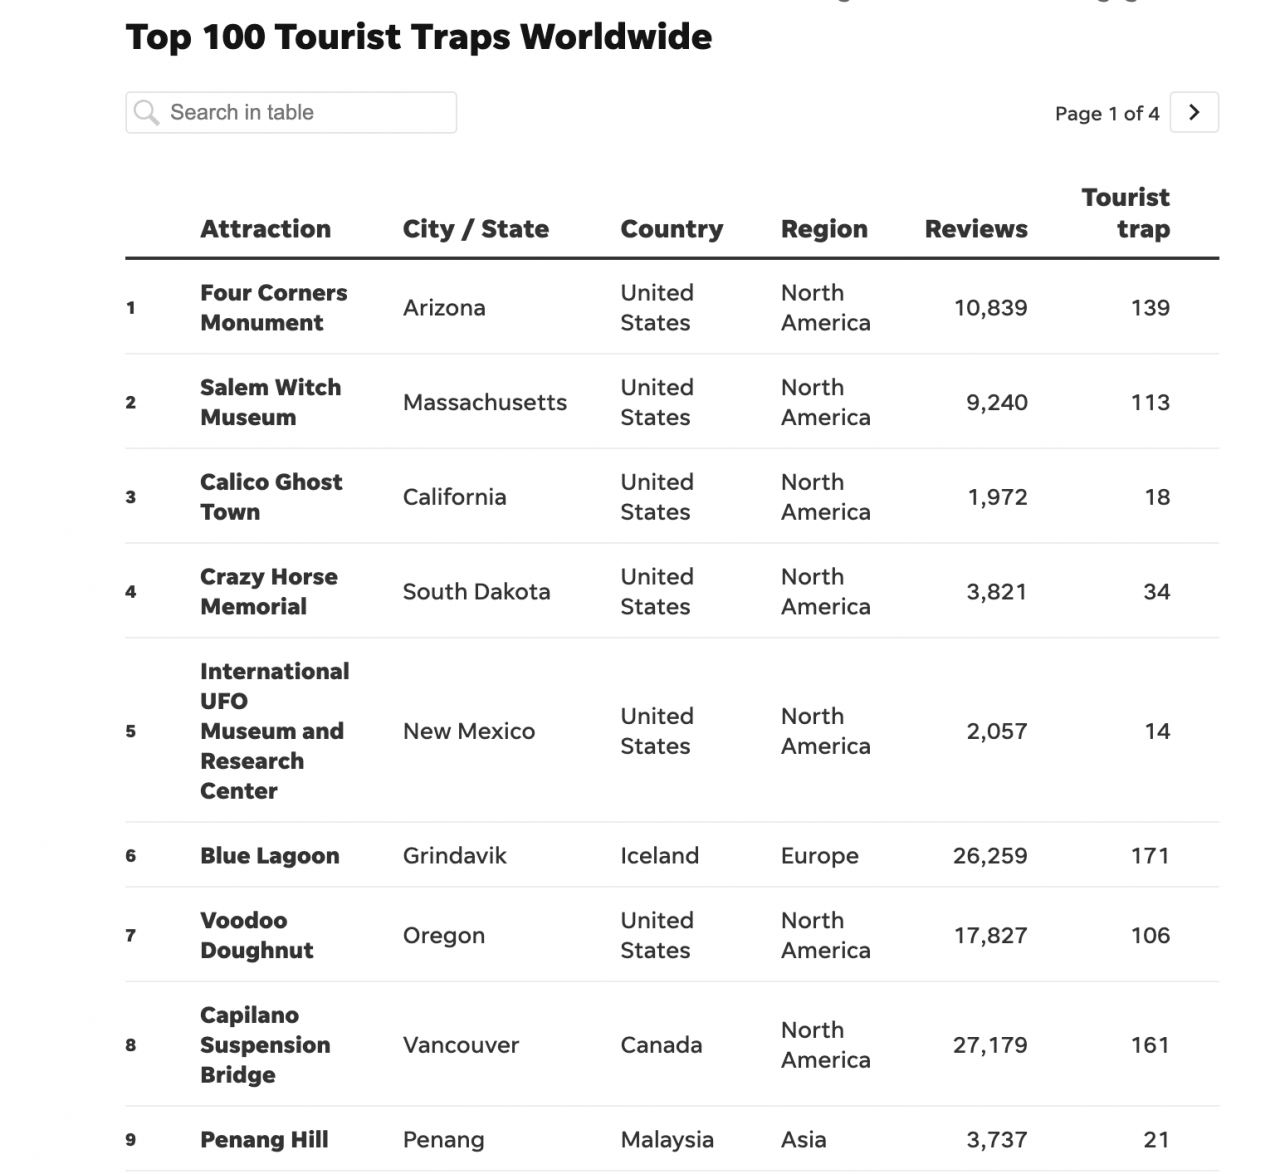 Penang Hill made it into the top 10 list globally, ninth overall in the USA Today ranking. – Screen grab, September 26, 2023